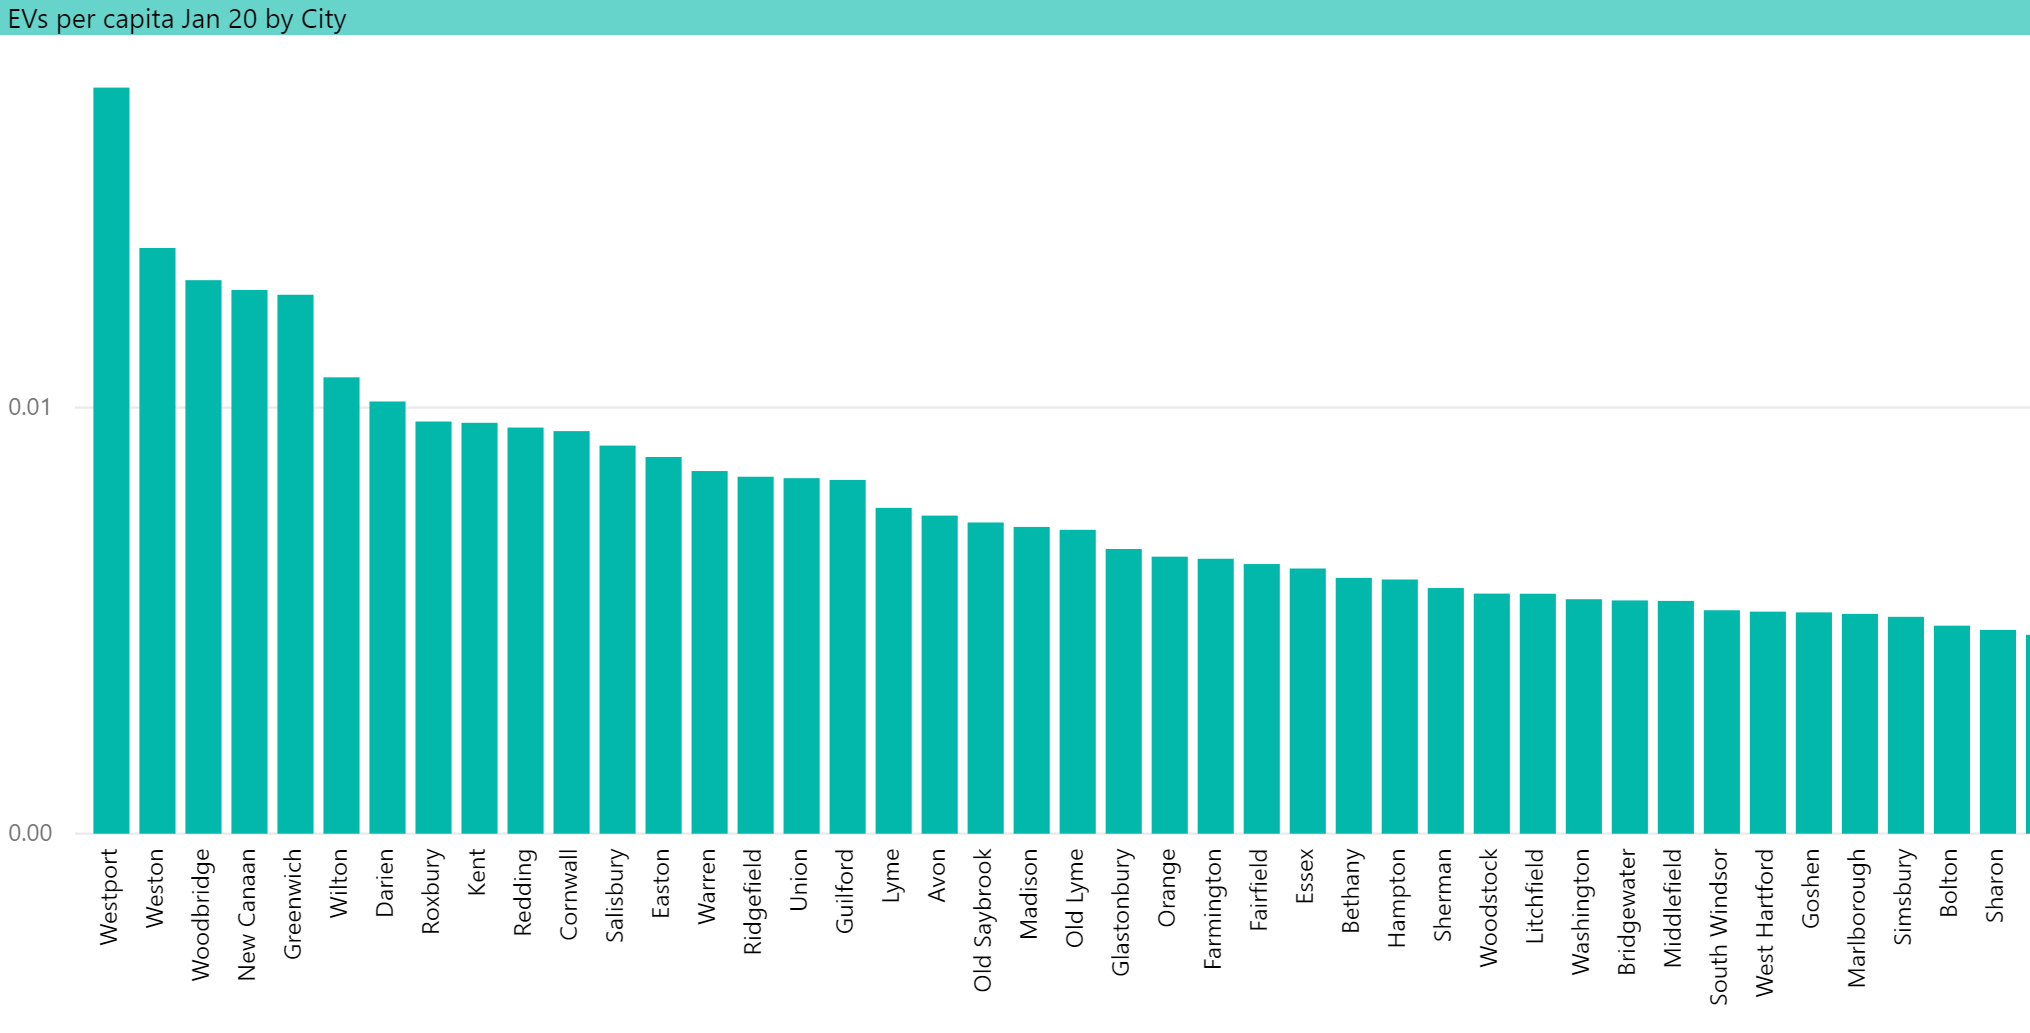 EV Ownership in CT by City, Ranked Per Capita